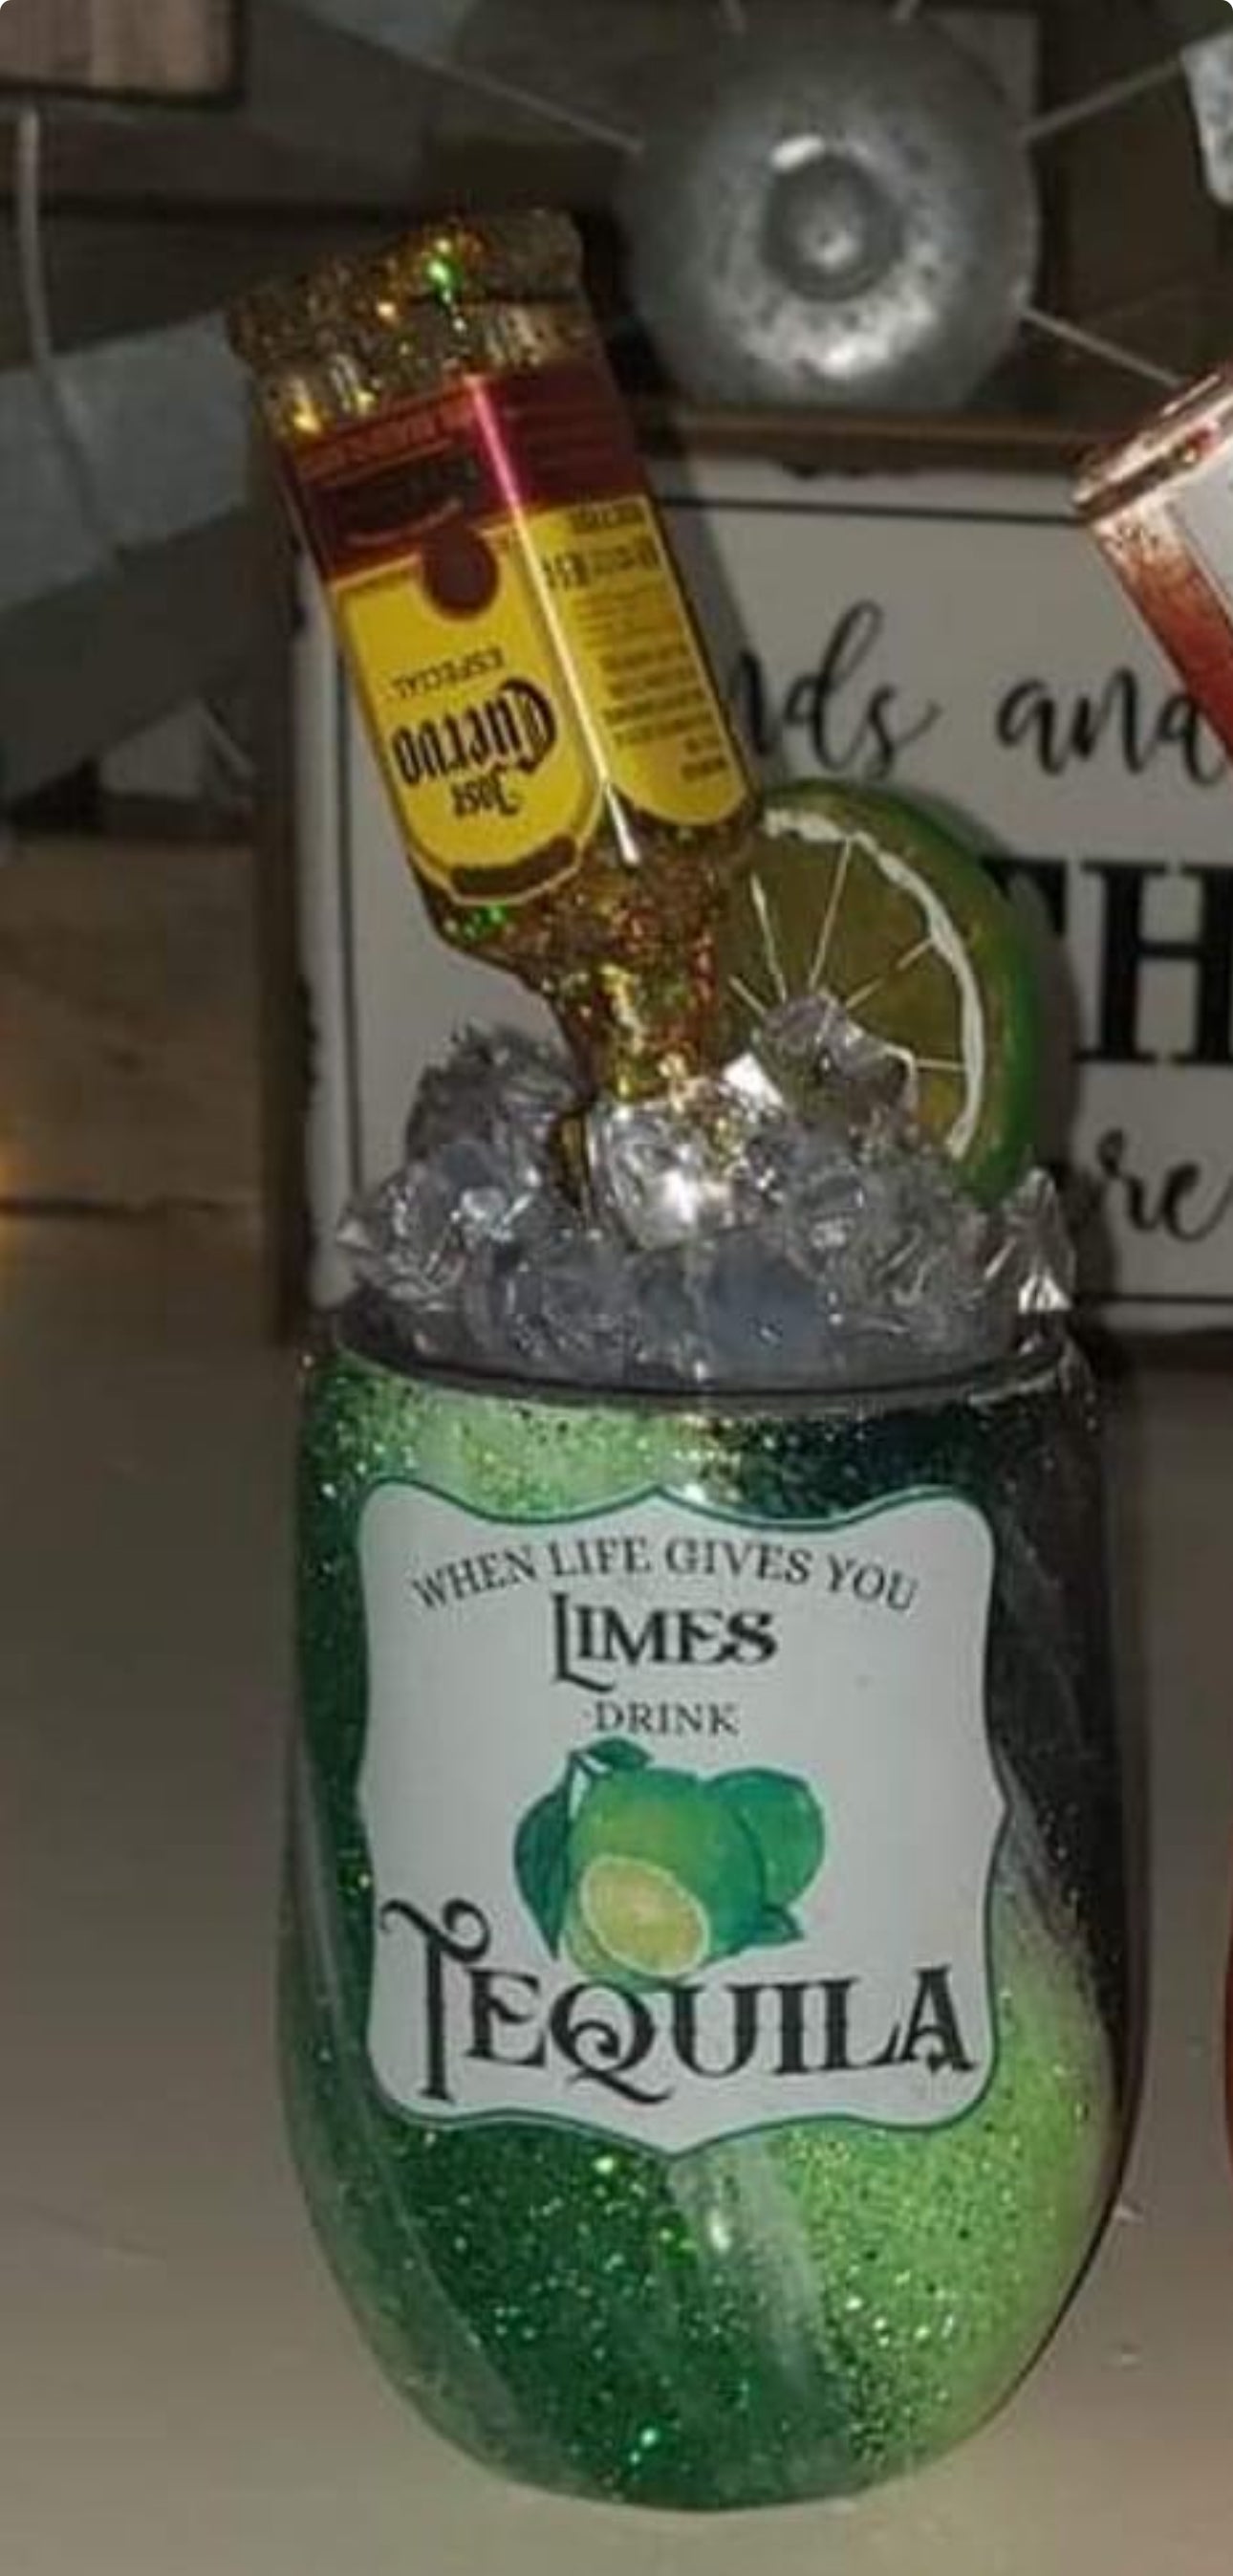 When life gives you limes Wine